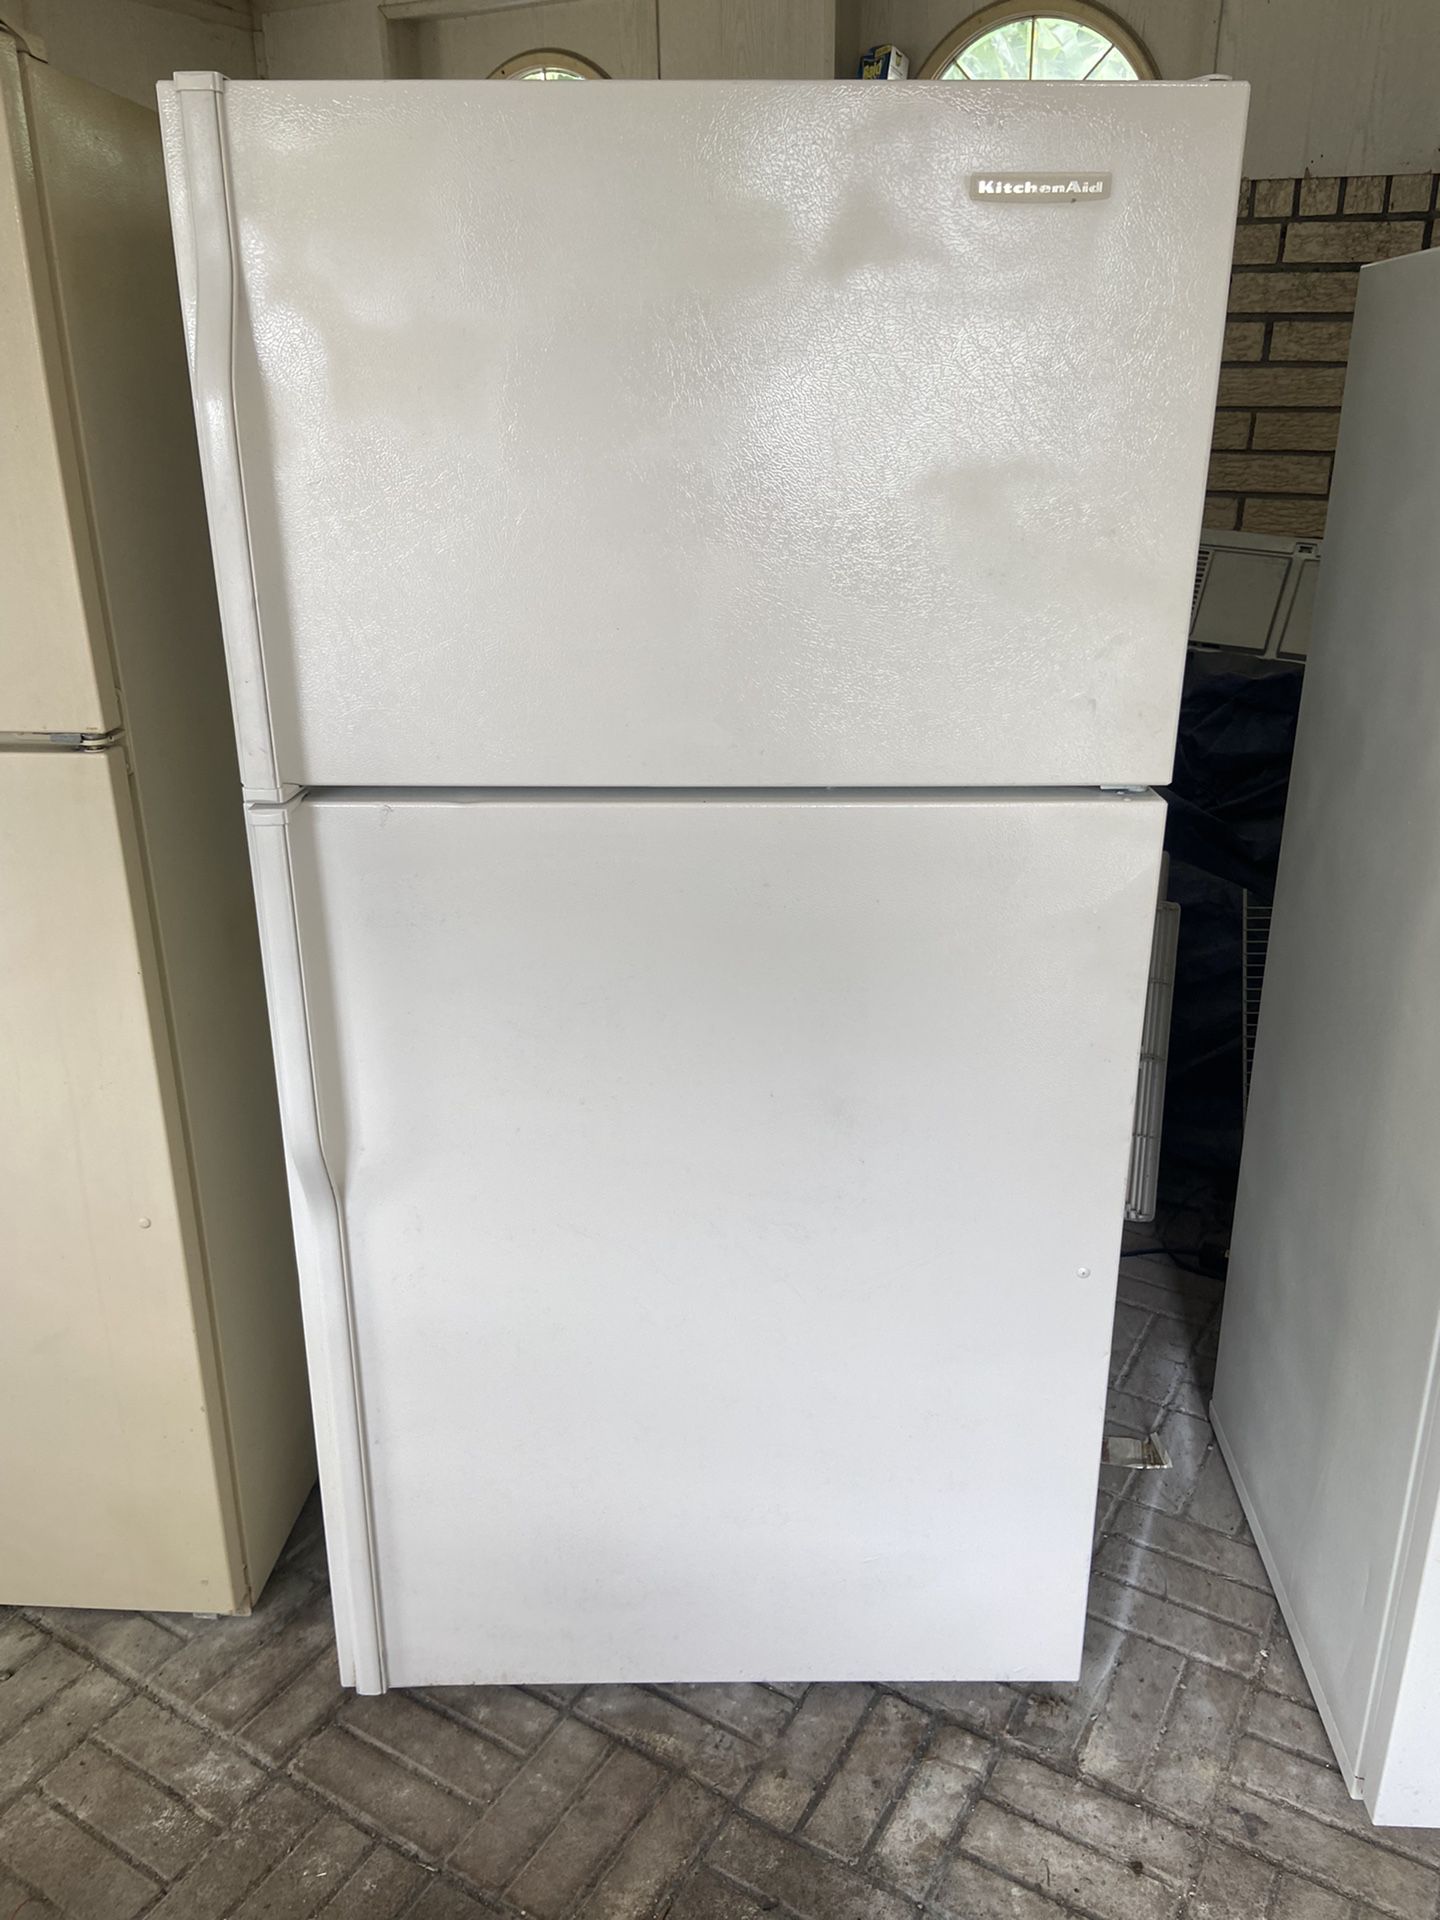 KITCHEN AID  22 Cu. ft FRIDGE!  RUNS GREAT!  HAS ICE MAKER! NOTHING  MISSING! THIS IS BIGGER THAN AN AVERAGE ONE! IN MARRERO! TEXT  